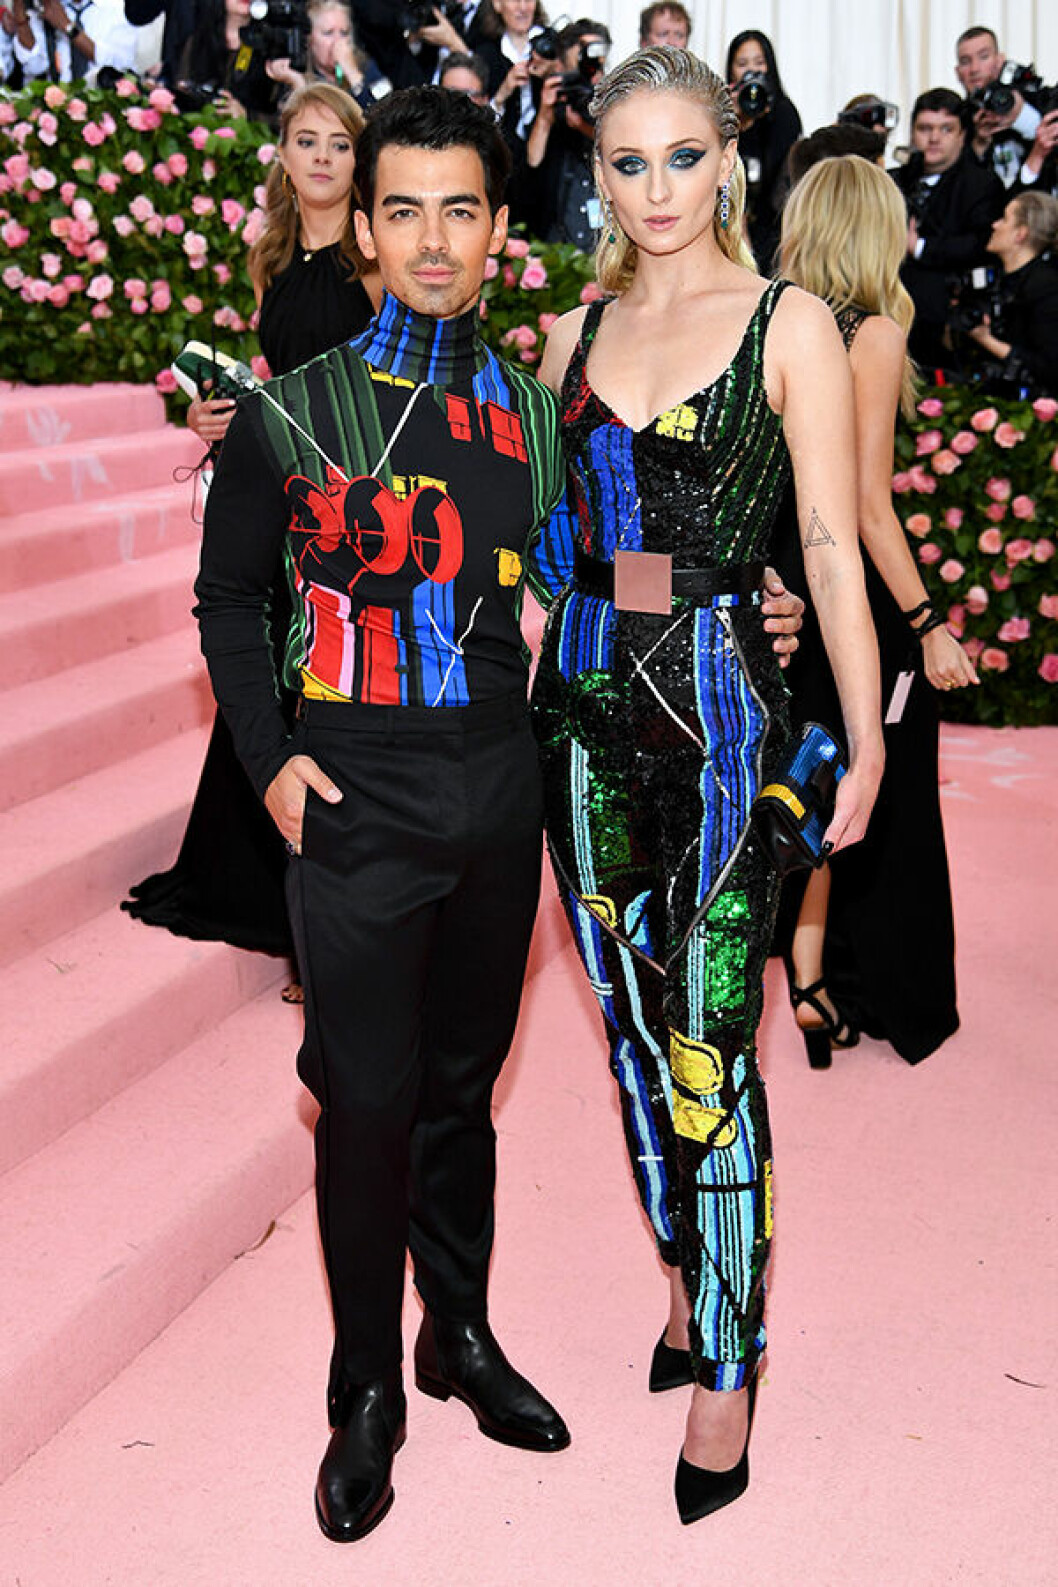 NEW YORK, NEW YORK &#8211; MAY 06: Joe Jonas and Sophie Turner attend The 2019 Met Gala Celebrating Camp: Notes on Fashion at Metropolitan Museum of Art on May 06, 2019 in New York City. (Photo by Dimitrios Kambouris/Getty Images for The Met Museum/Vogue)